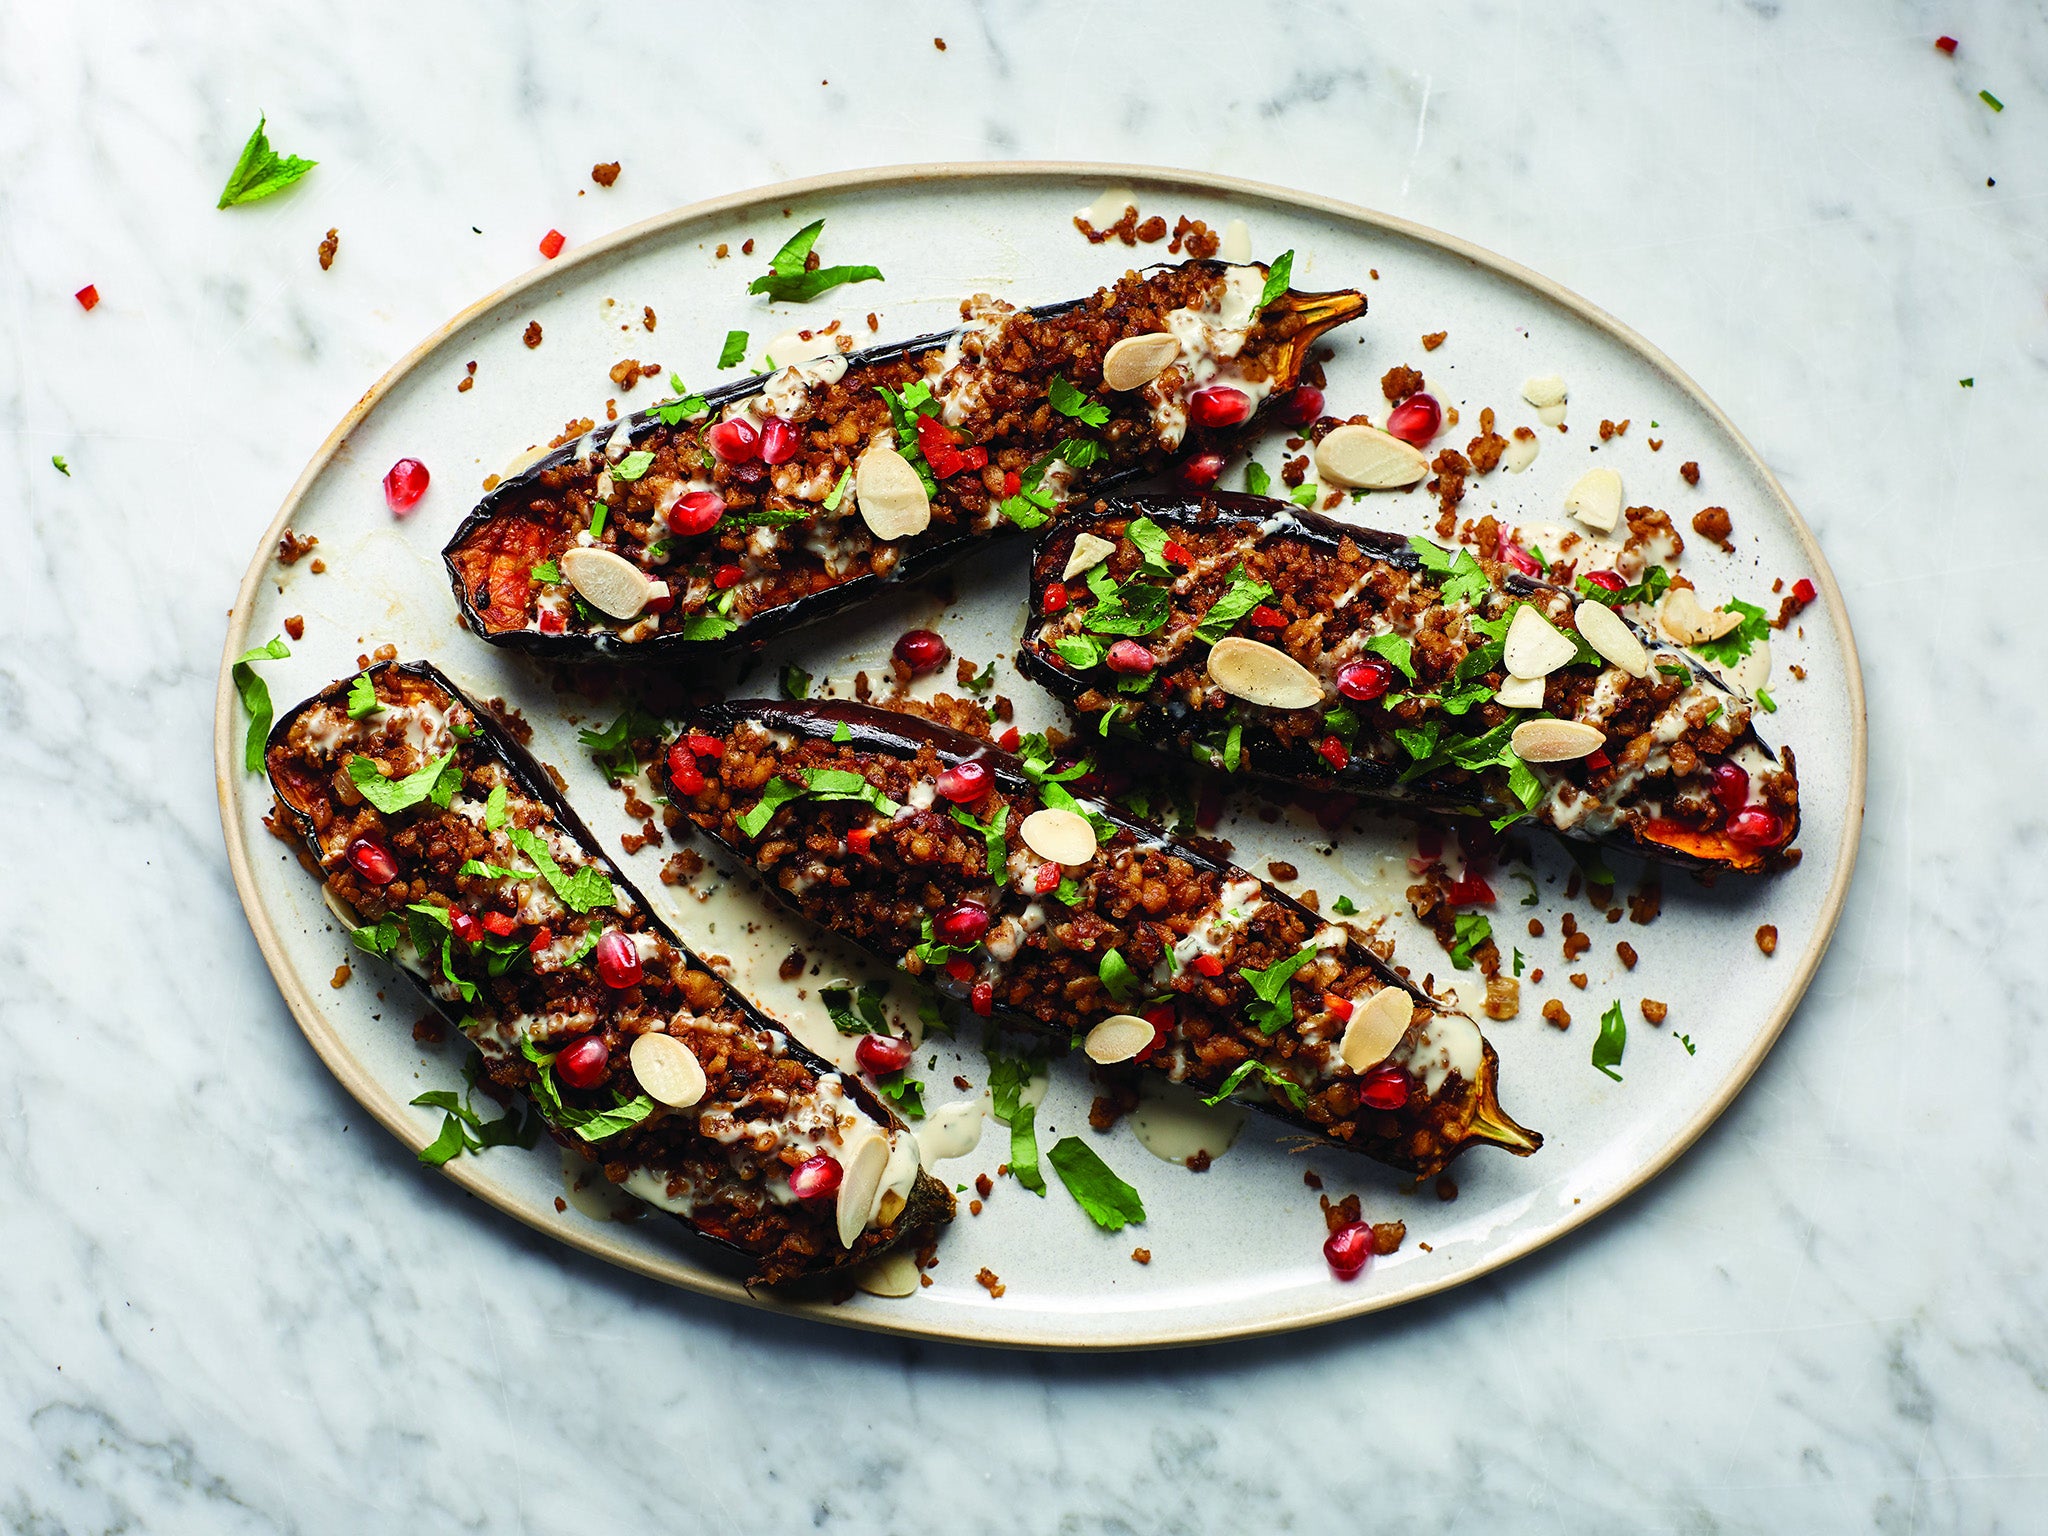 Speedy BOSH!’s spicy stuffed aubergine recipe comes packed with flavour – and a fascinating backstory